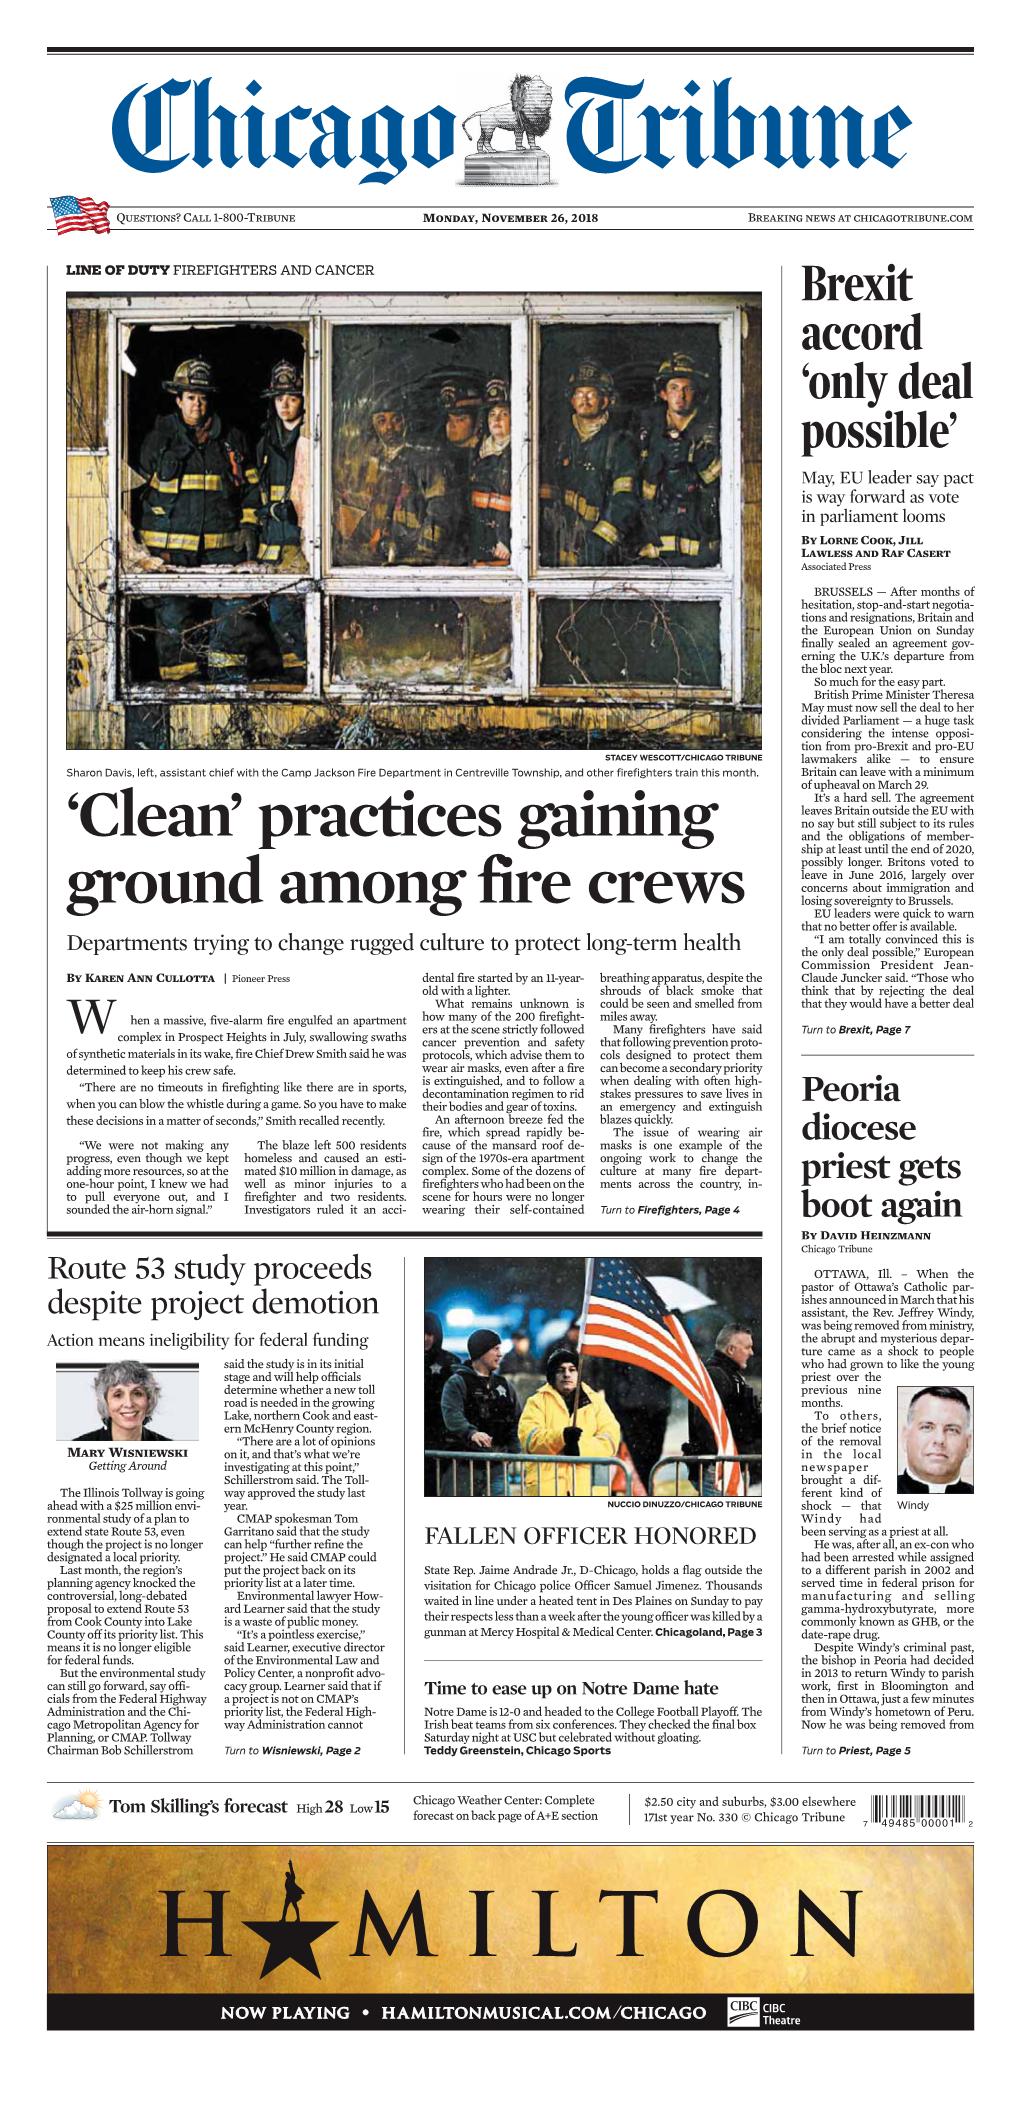 Practices Gaining Ground Among Fire Crews